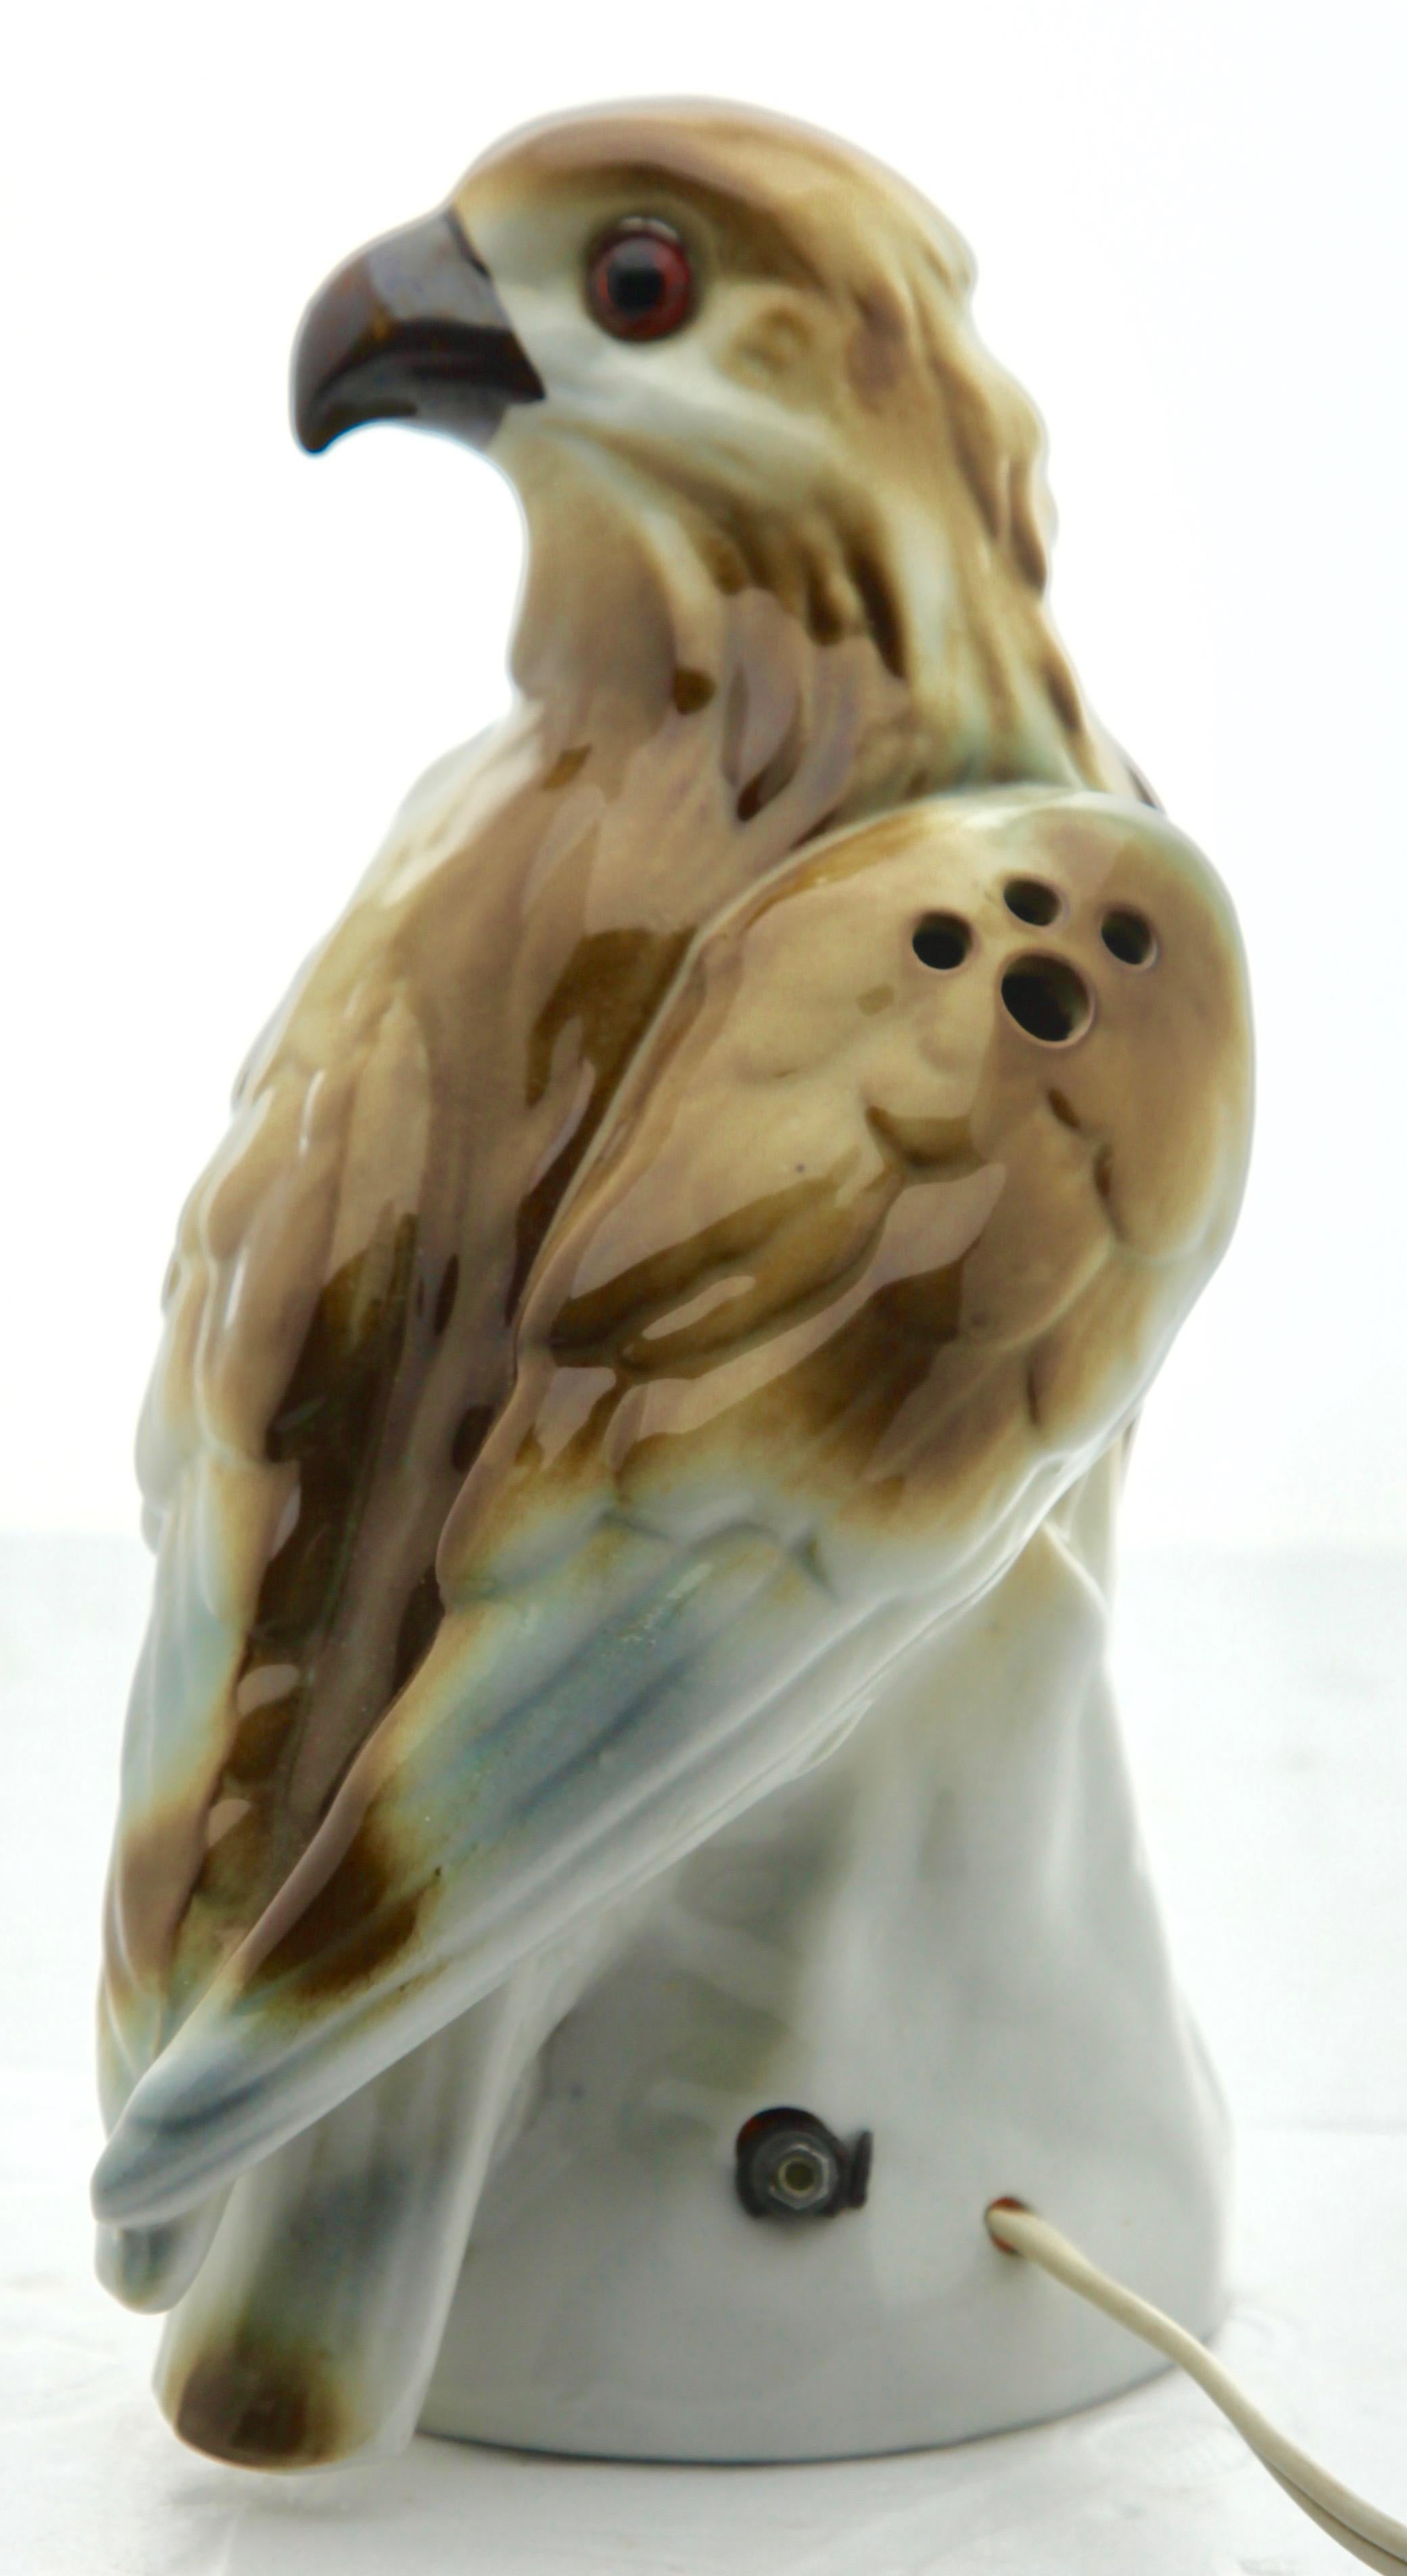 Rare and gorgeous eagle perfume lamp attributed to Carl Scheidig Grafenthal, Germany.
Excellent condition, lamp is in working order.
Size: Height 21 cm, 8.26in., width 12 cm, 4.72 in.
Germany, 1930s, excellent condition
Porcelain figurine/air